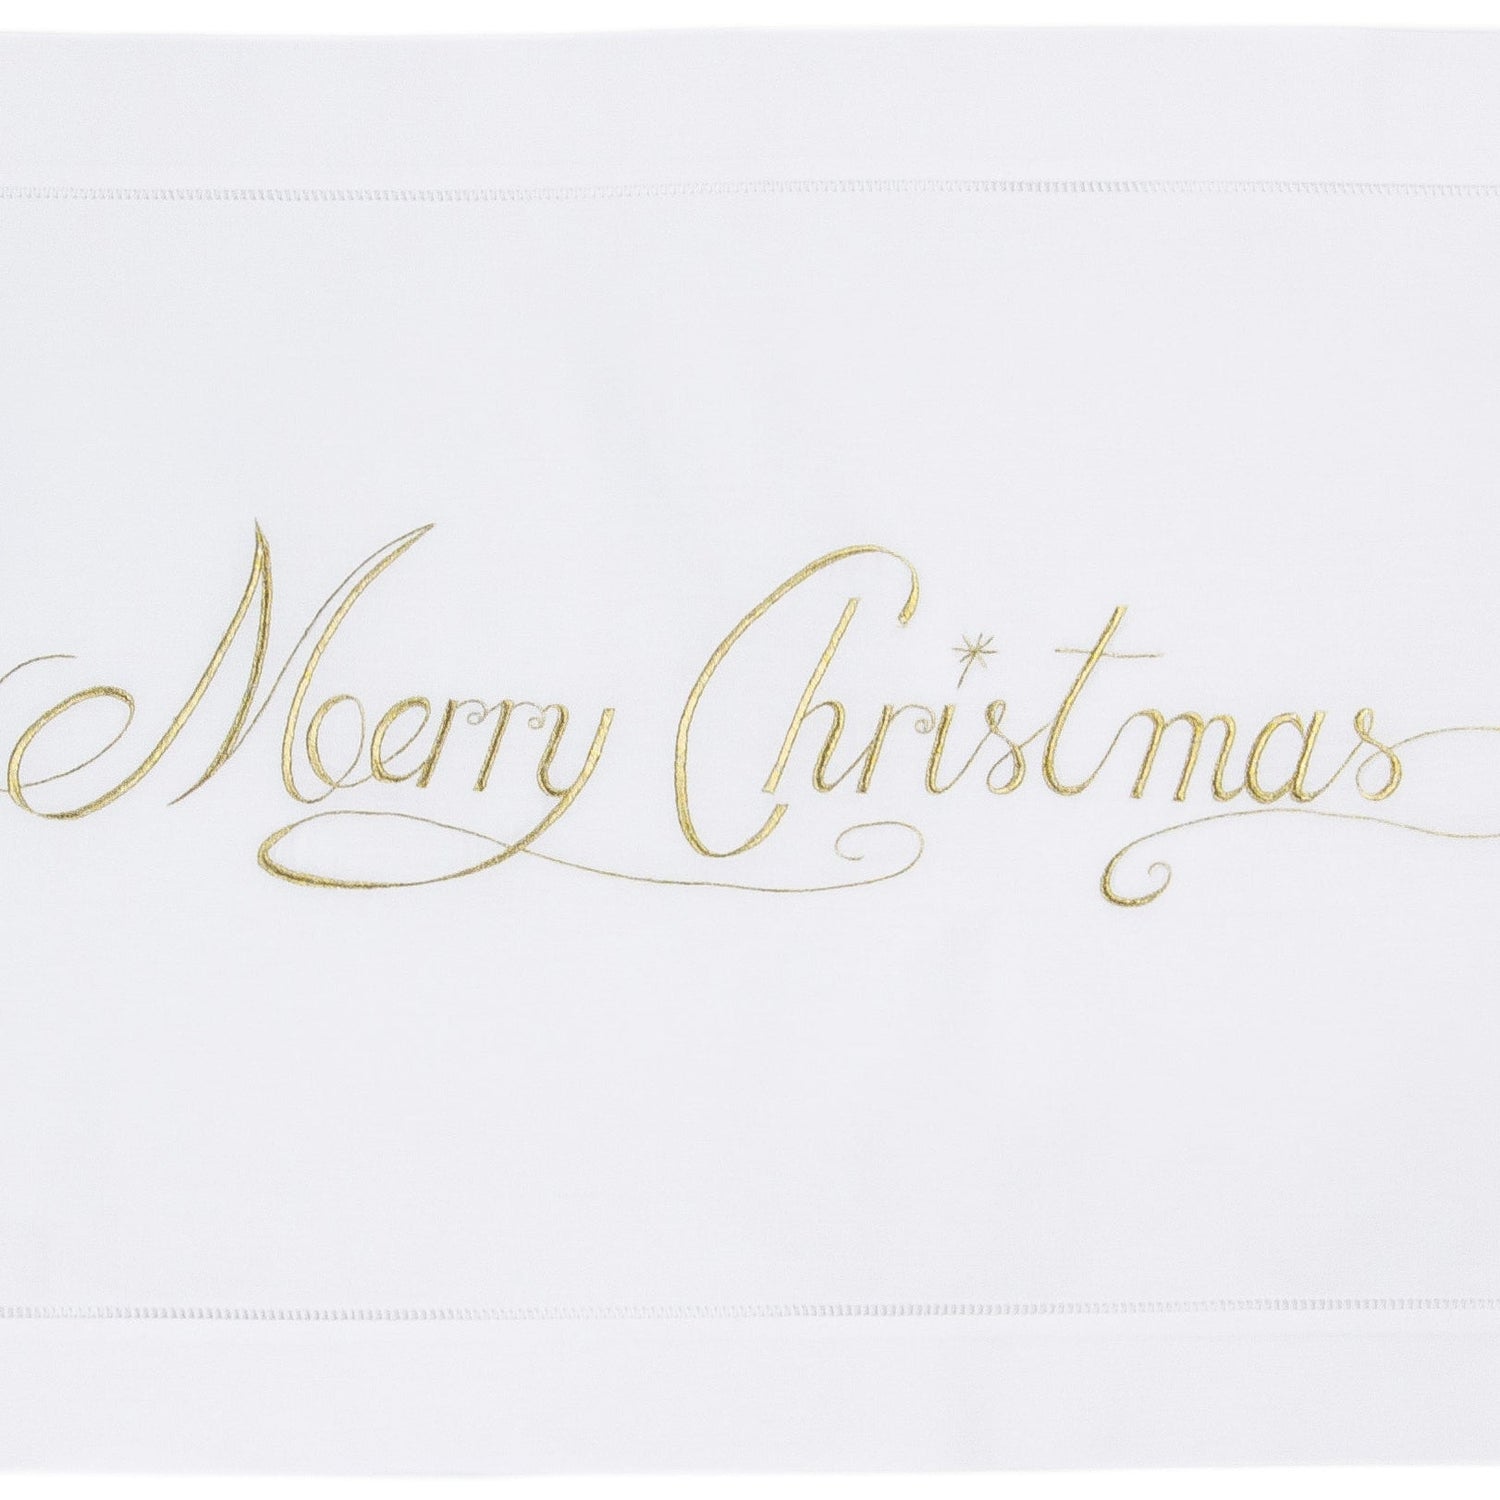 A detailed image of the embroidered words "Merry Christmas" in gold cursive